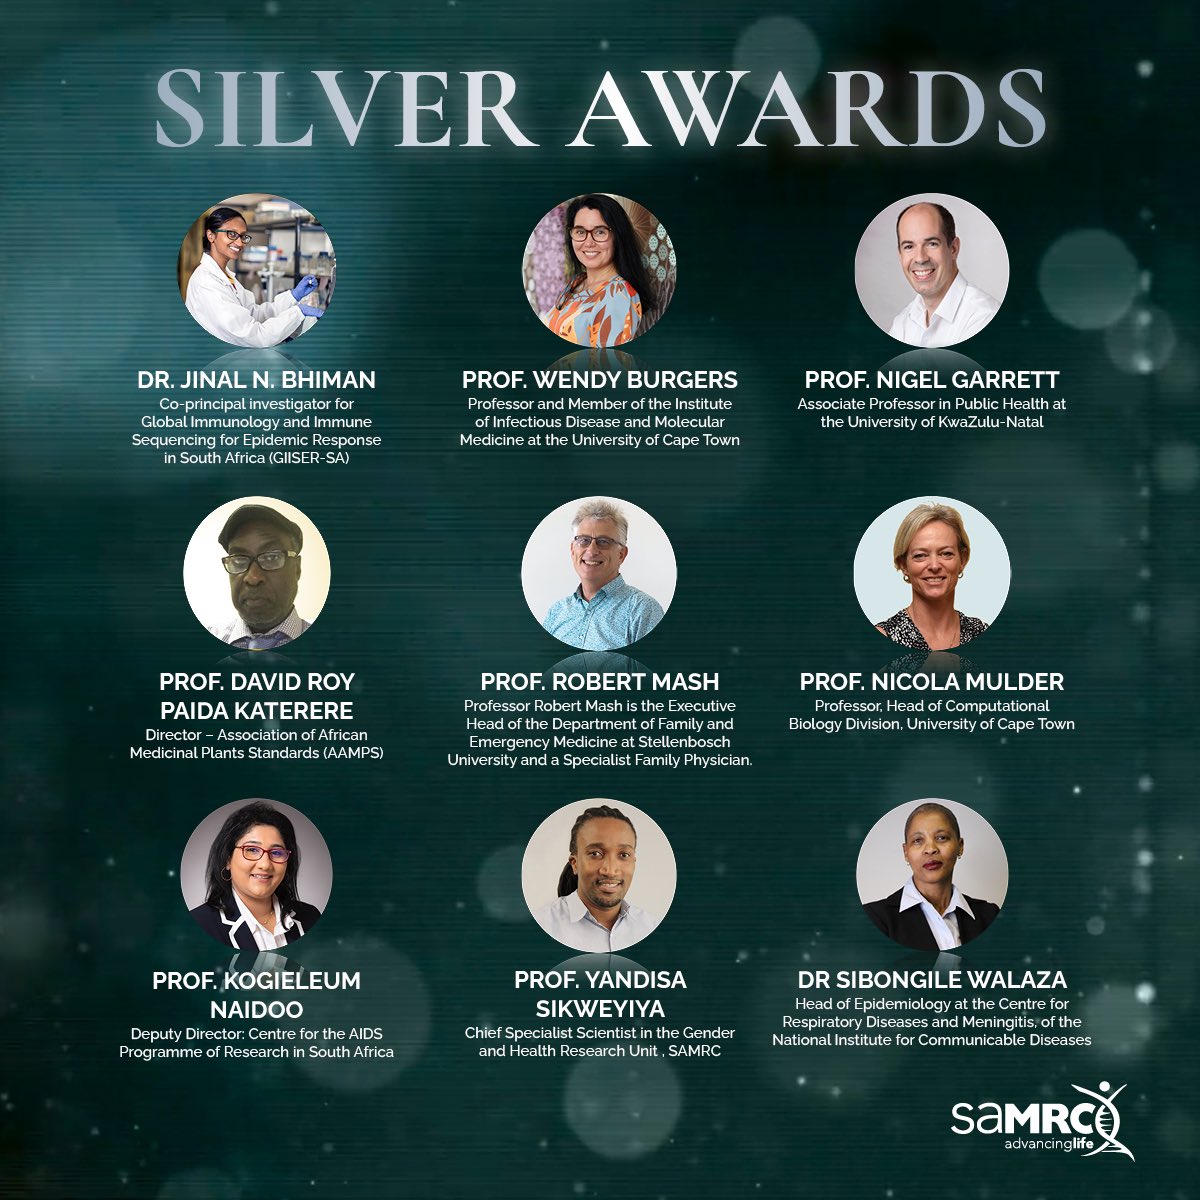 In the silver awards category a salute is given to scientists who have made important scientific contributions within 10yrs of having been awarded their PhD or Master of Medicine (MMed). This year, the award recipients were: